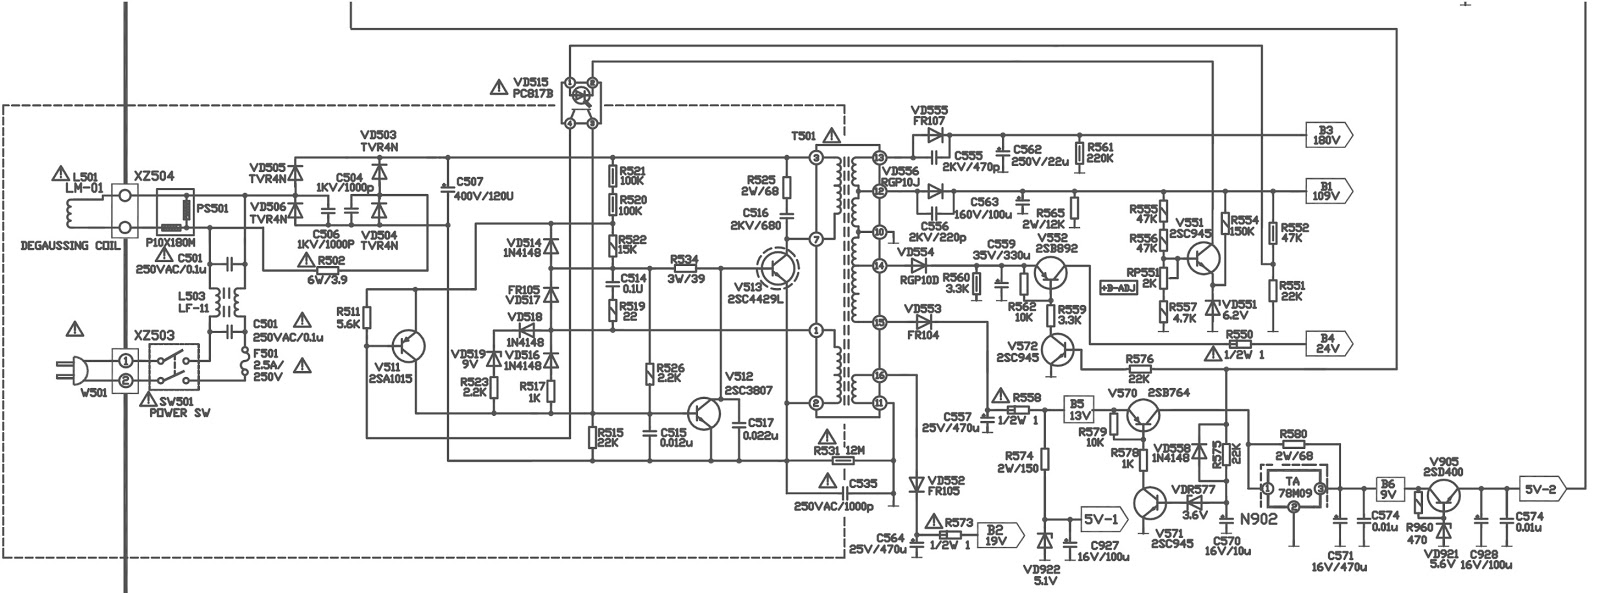 Electronic Circuits Page 99 :: Next.gr